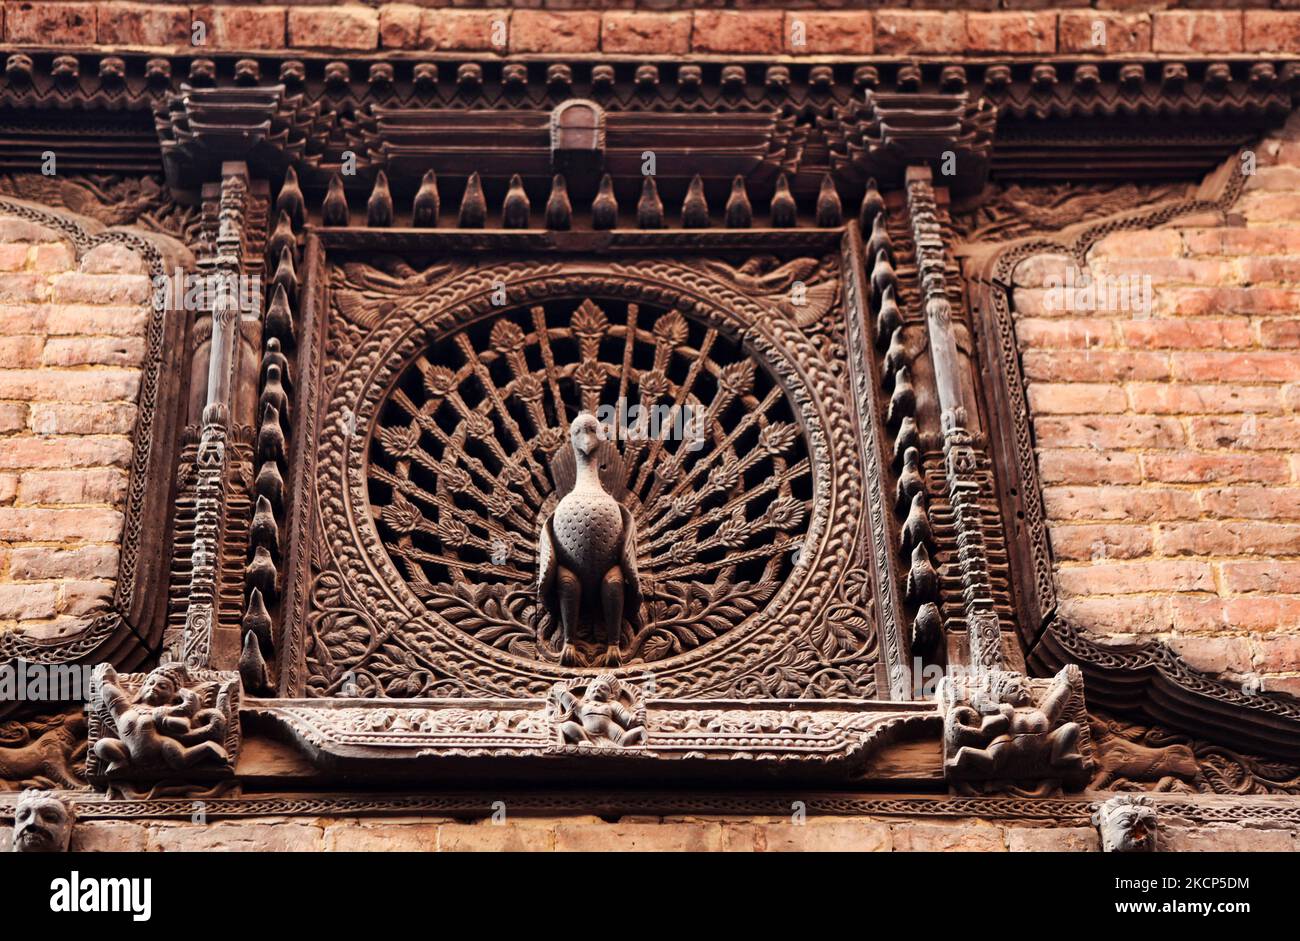 Peacock window at Pujari Math in the ancient city of Bhaktapur, Nepal, on December 08, 2011. The peacock window dates back to the early 15th century and is a very famous example of the workmanship that can be seen throughout much of Nepal. (Photo by Creative Touch Imaging Ltd./NurPhoto) Stock Photo